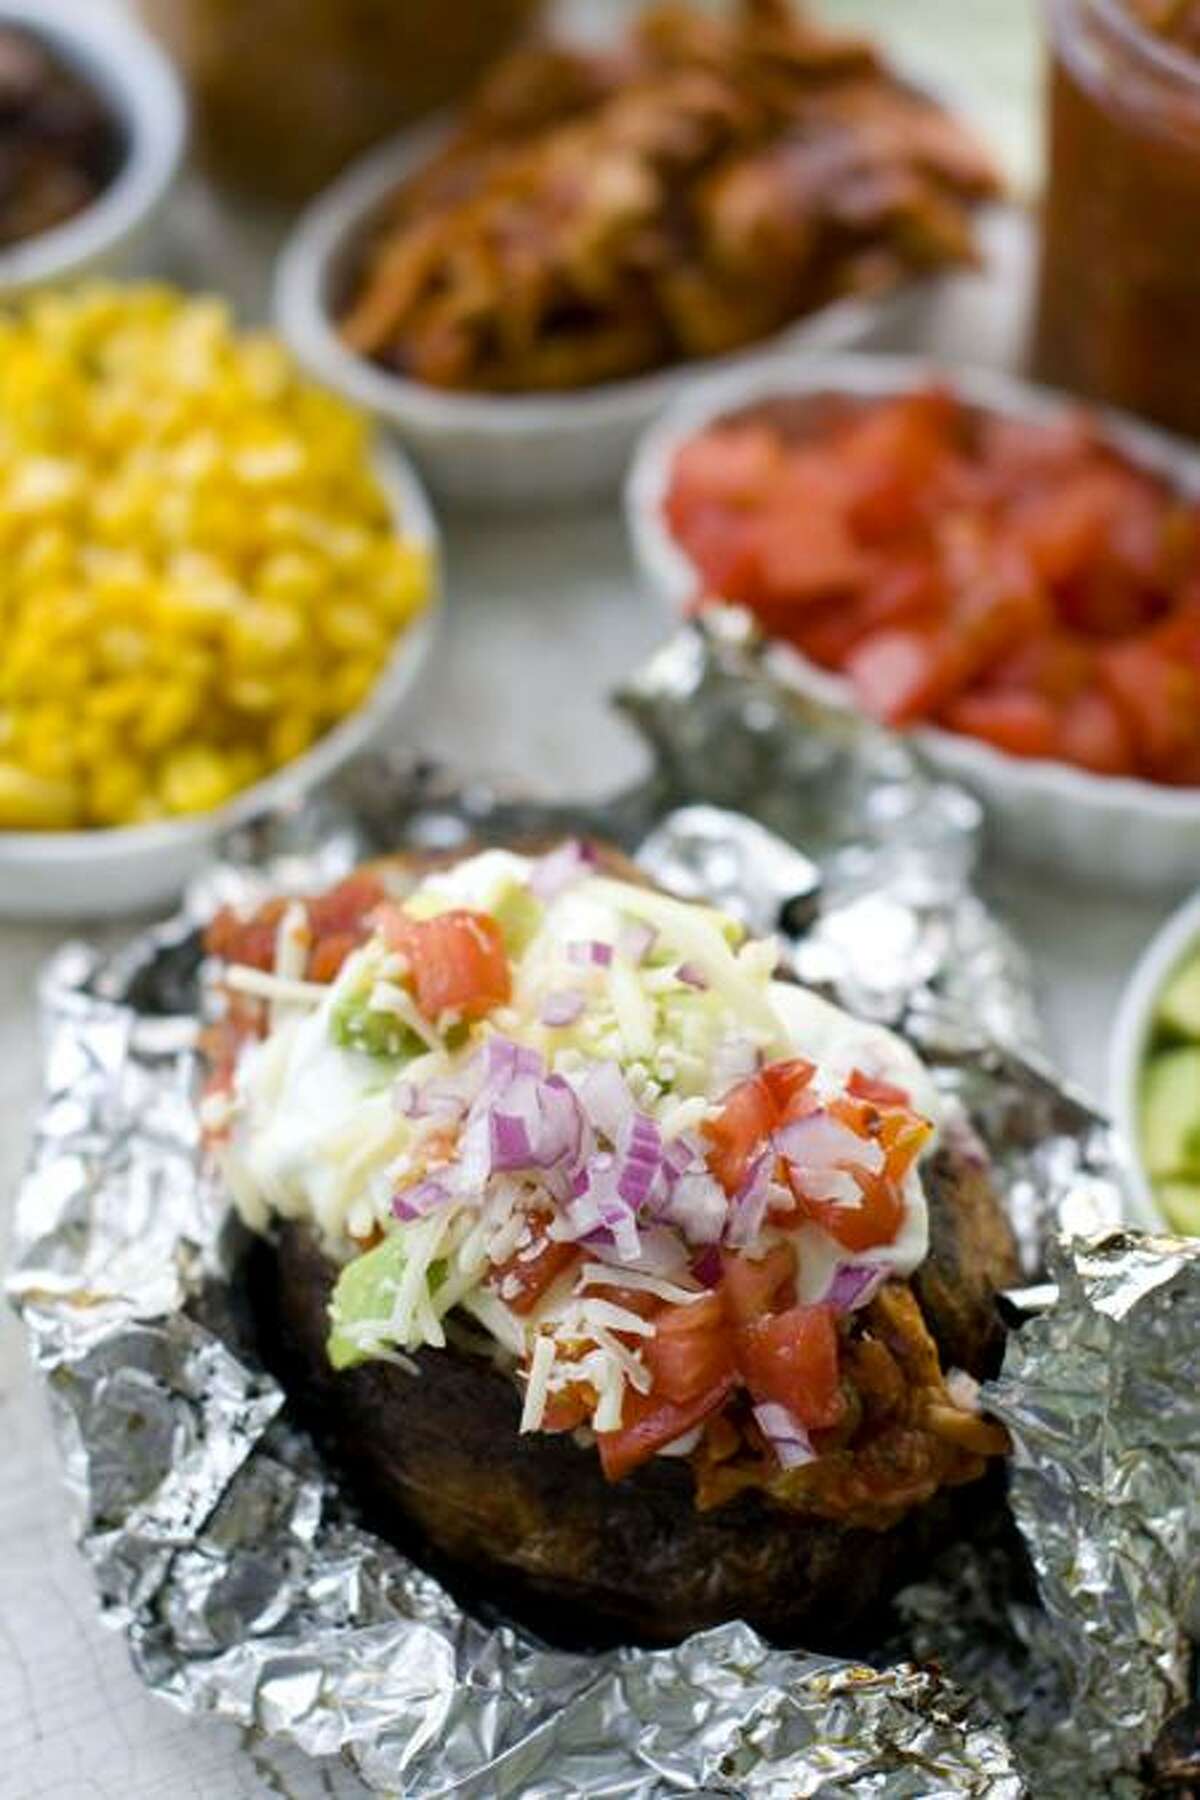 Matthew Mead/Associated Press photo: Grilled Baked Potatoes